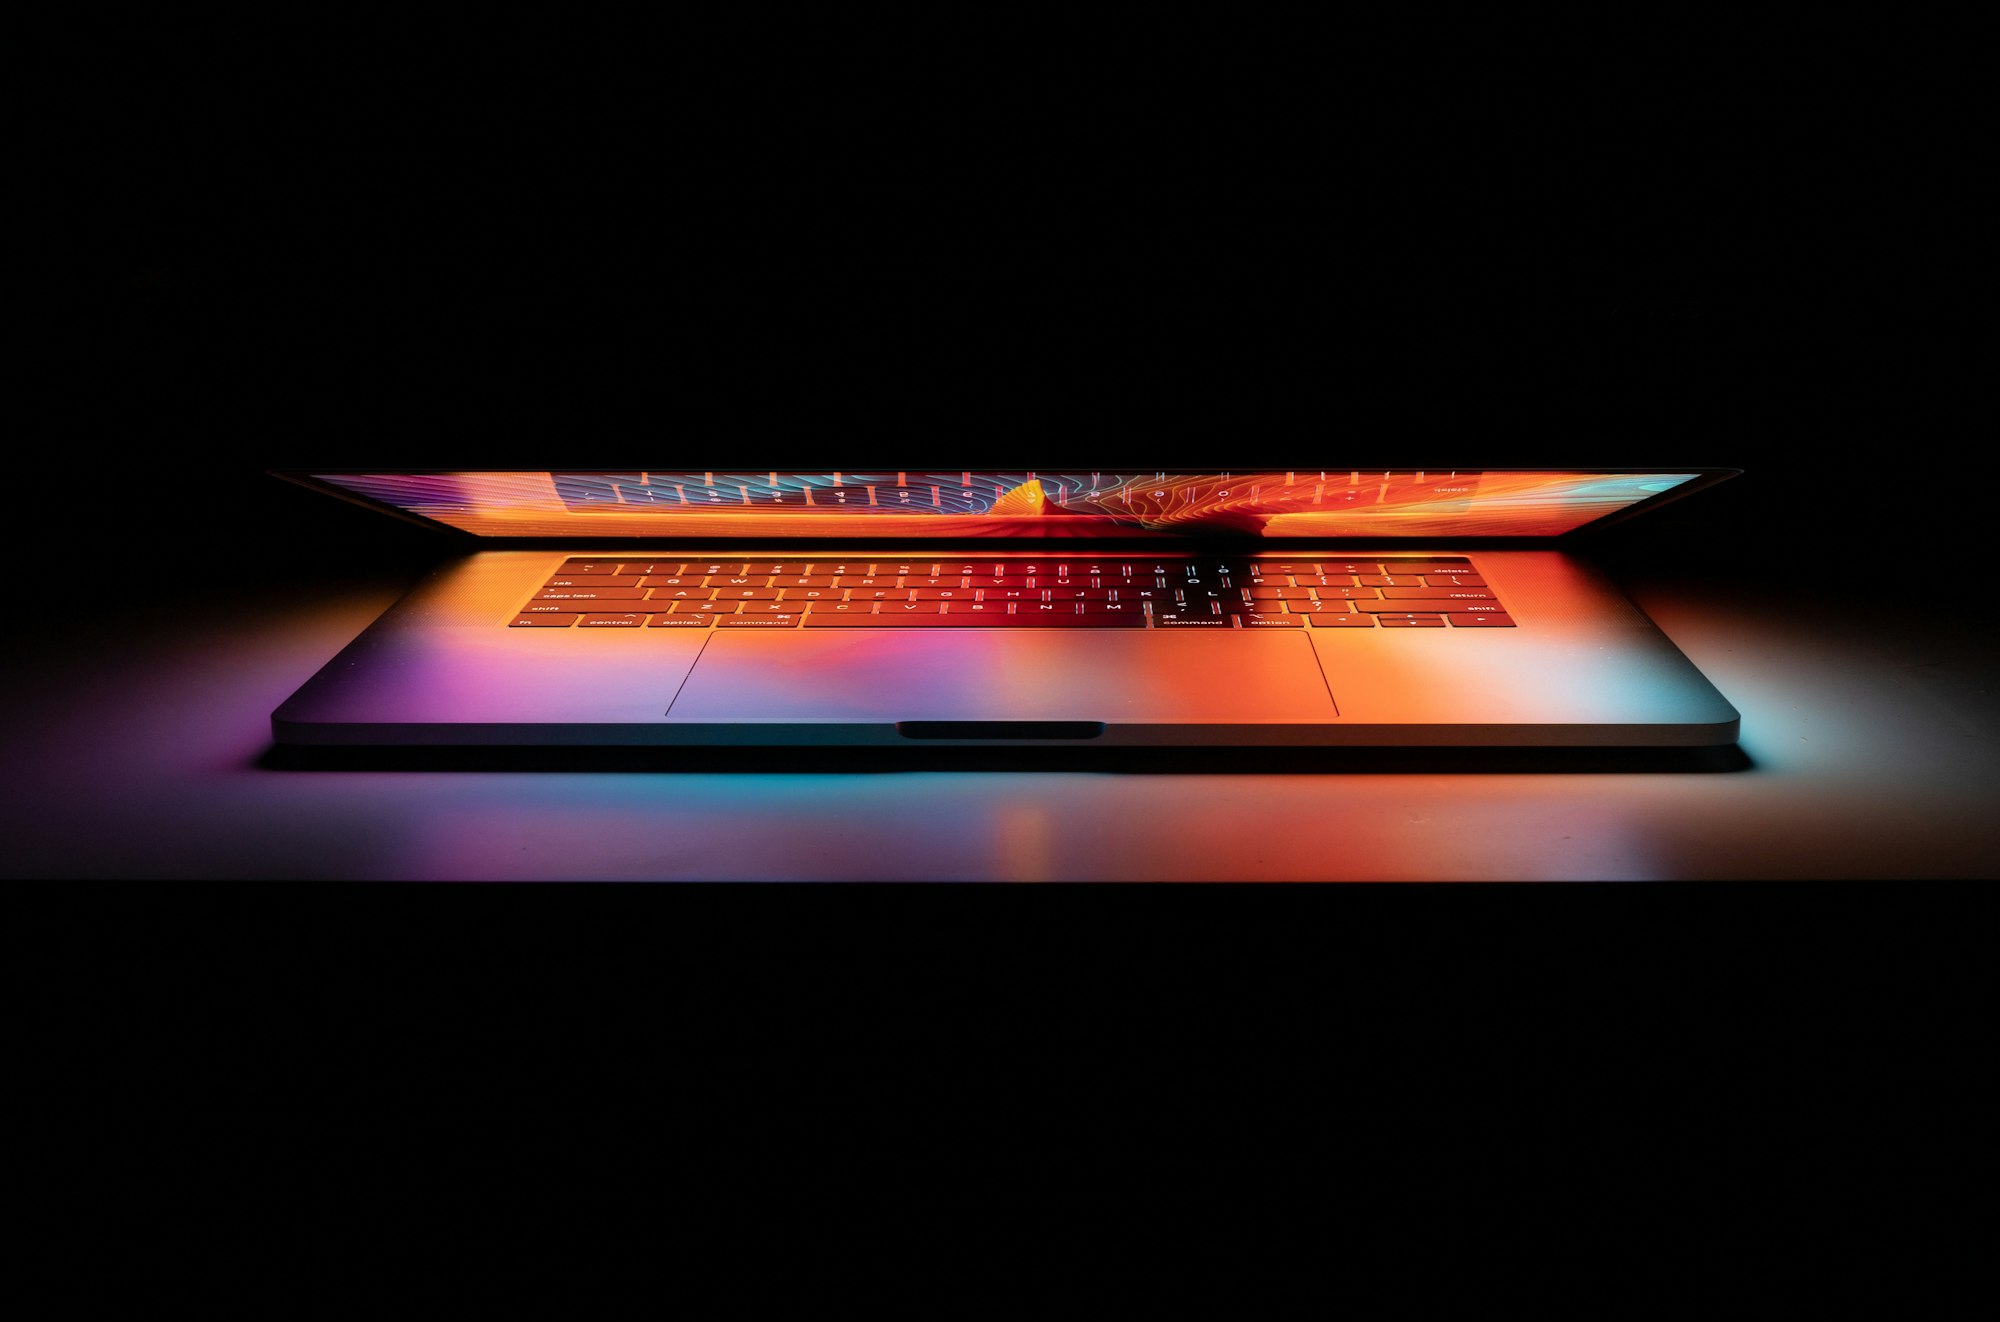 ANSI or ISO? How to Identify Your MacBook's Keyboard Layout